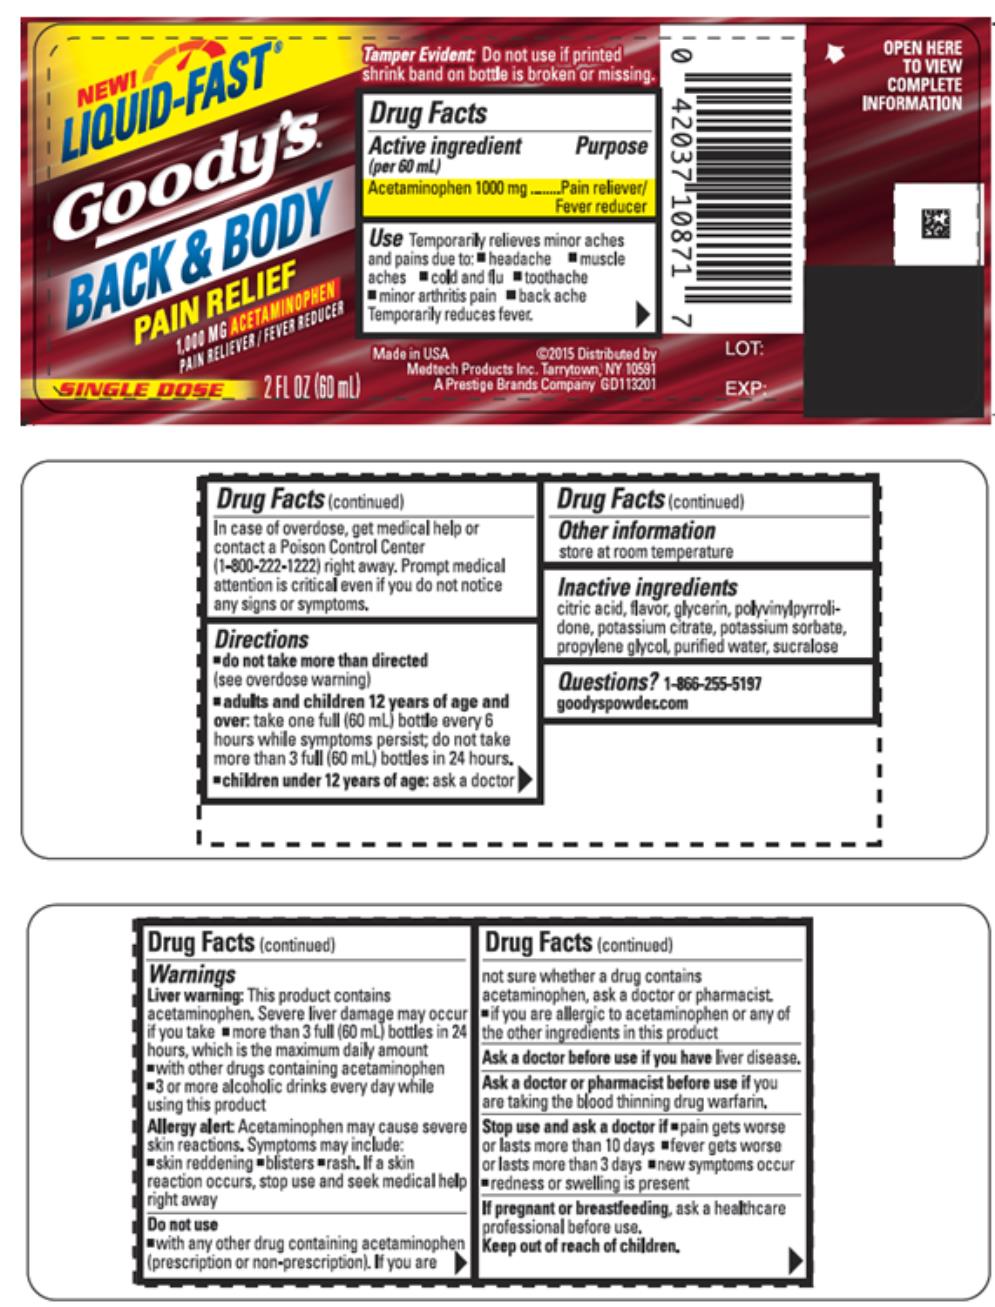 Goody’s
Back & Body
Pain Relief
1,000 MG Acetaminophen
Pain Reliever/ Fever Reducer
2 FL OZ (60 mL)
